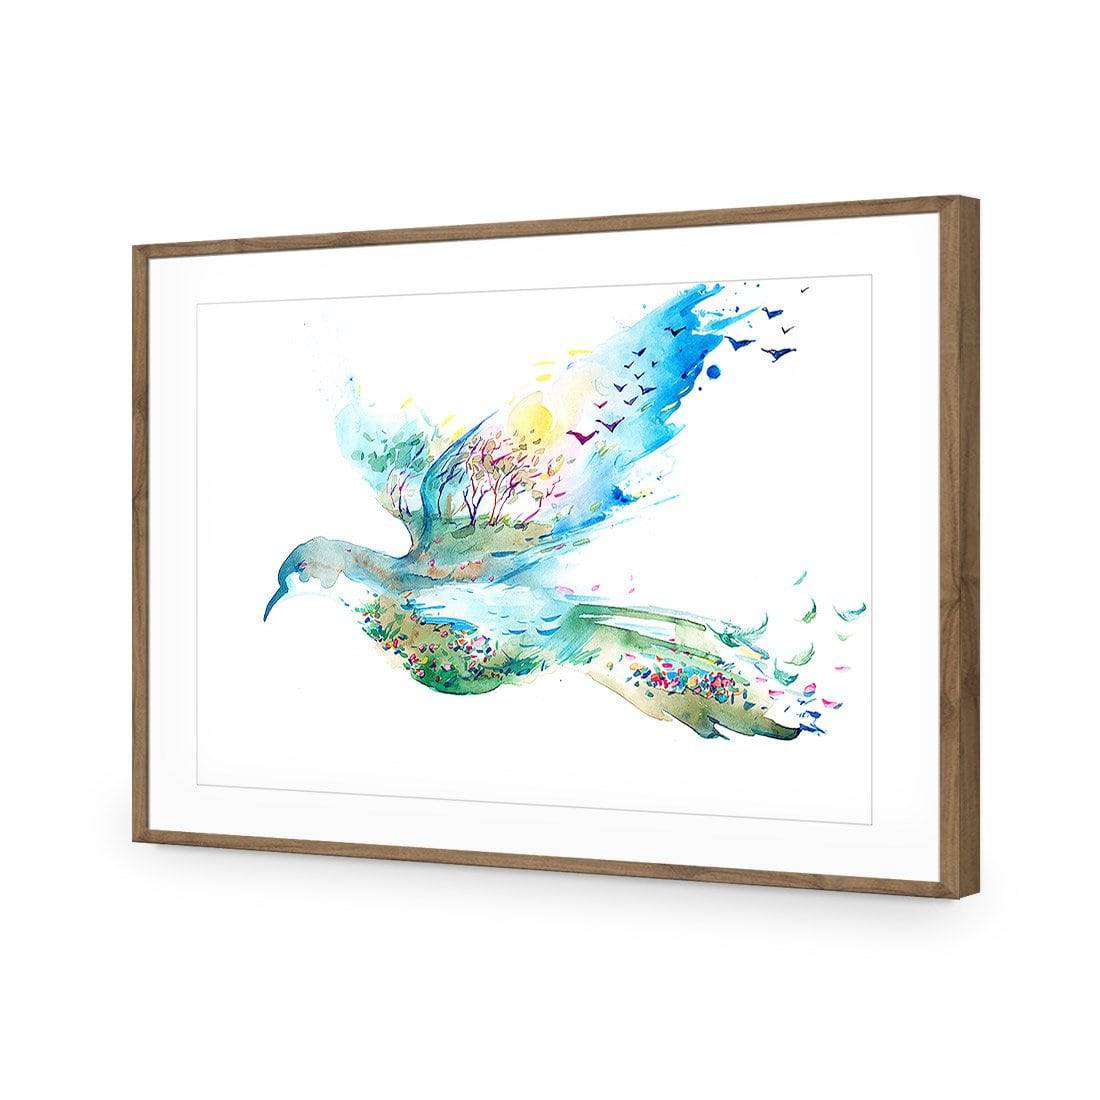 Dove Of Peace-Acrylic-Wall Art Design-With Border-Acrylic - Natural Frame-45x30cm-Wall Art Designs